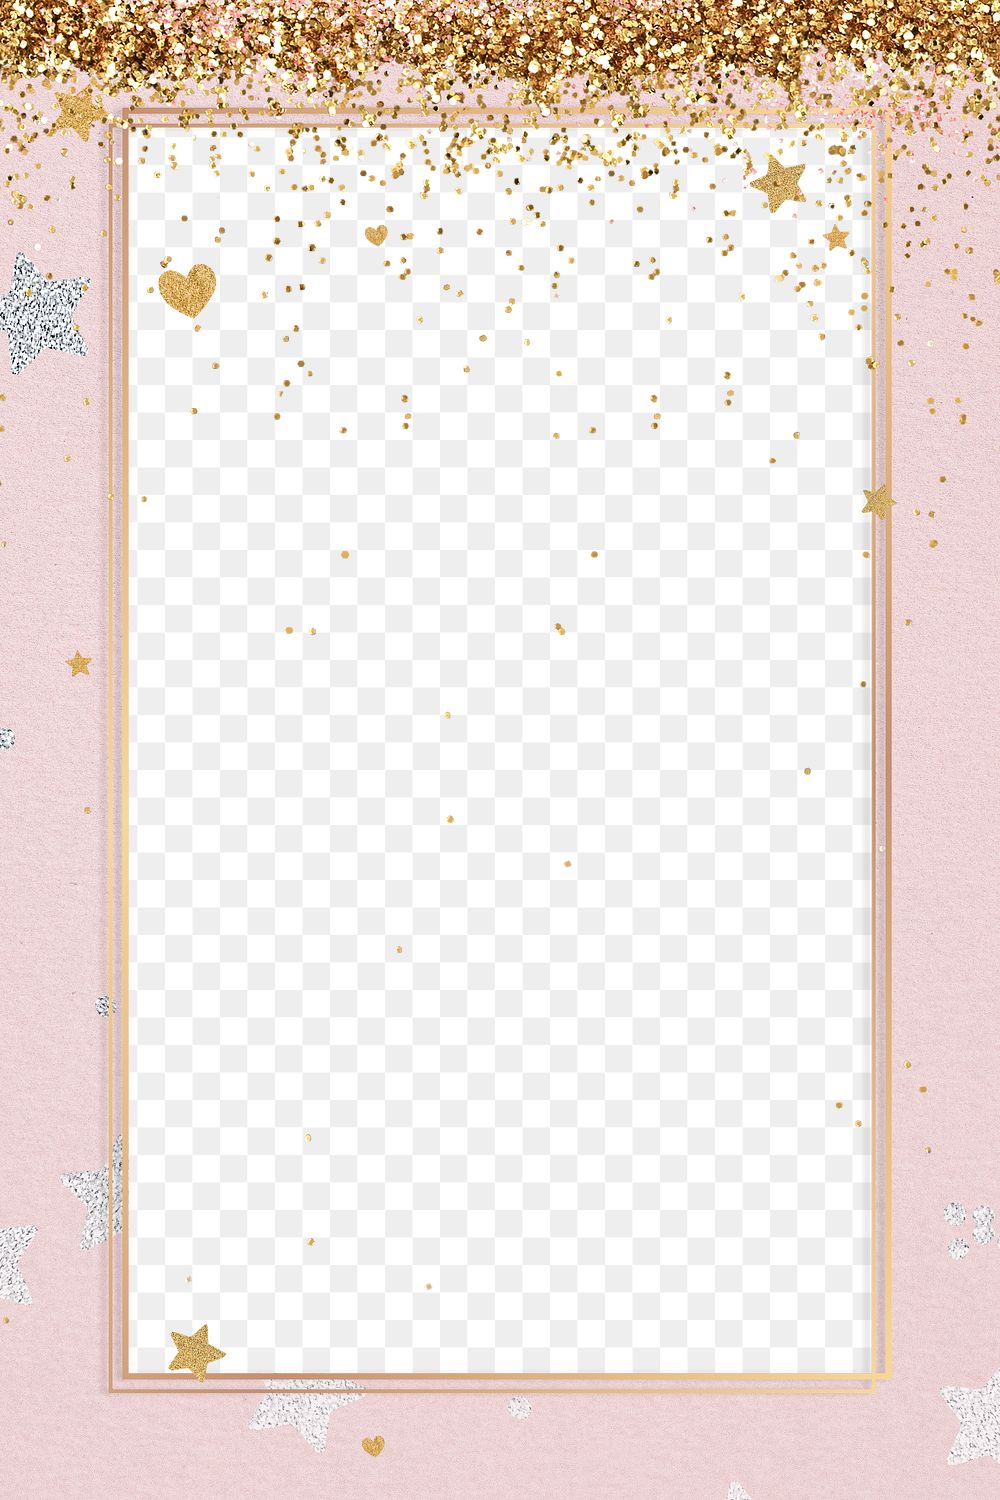 Png glittery heart pattern party | Free PNG - rawpixel